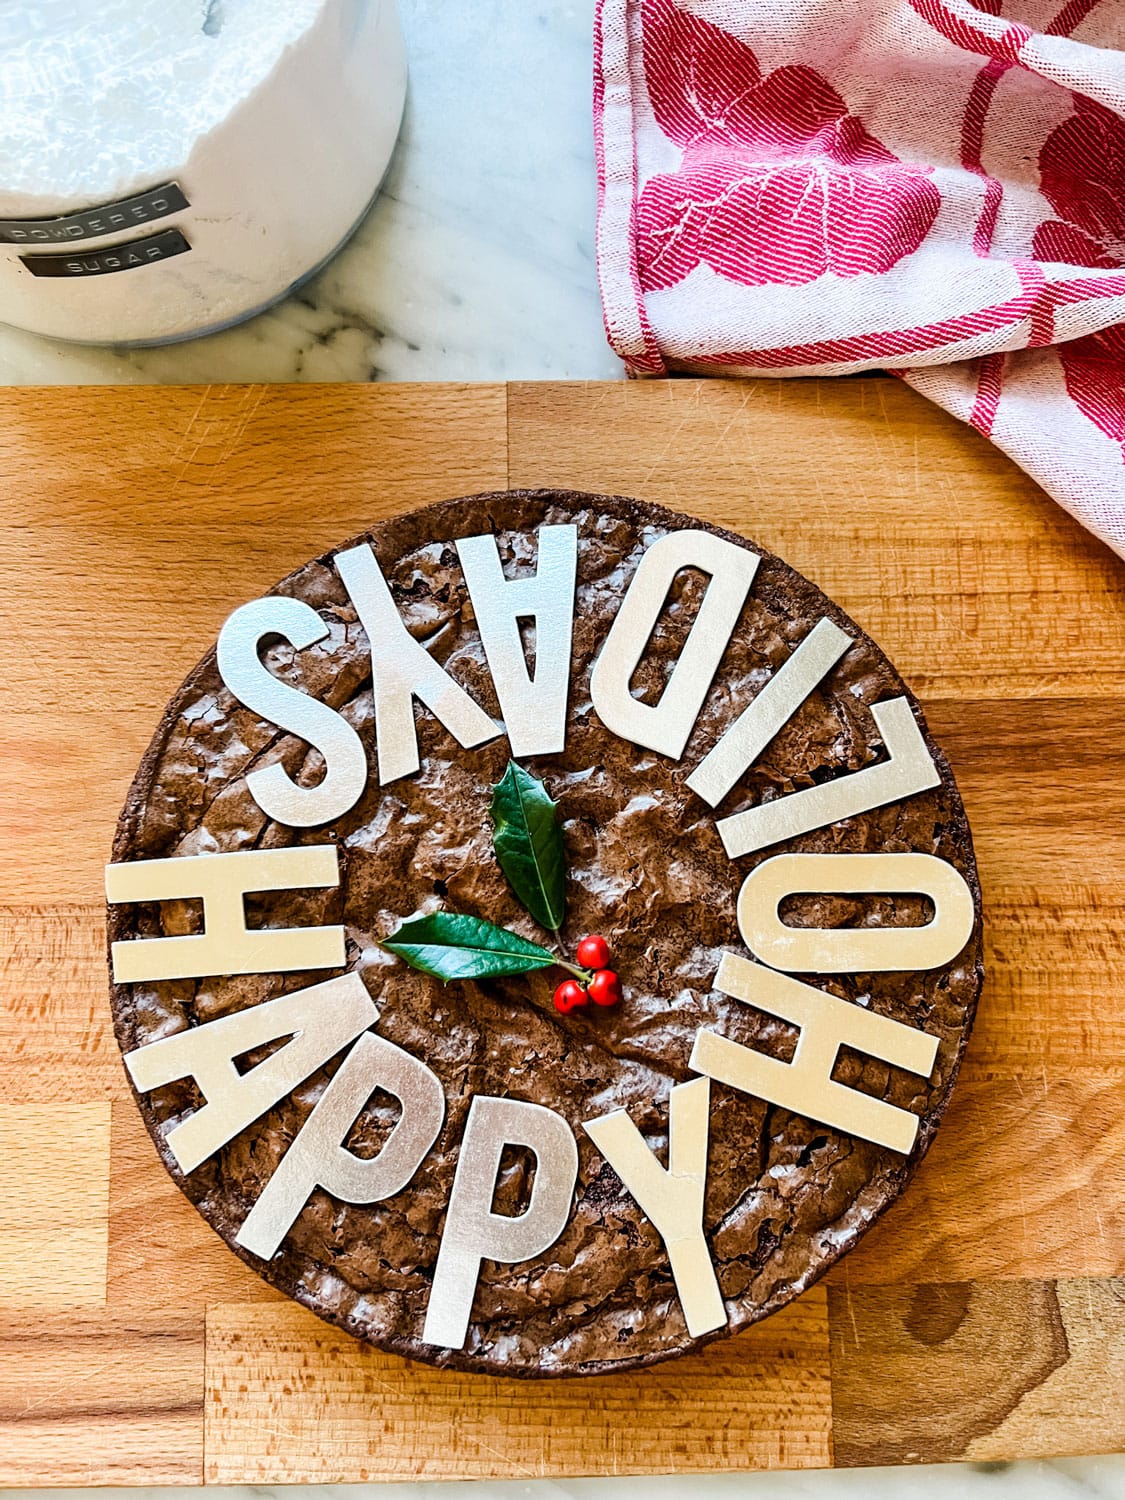 https://mostlovelythings.com/wp-content/uploads/2022/12/brownies-with-chipboard-letters.jpg